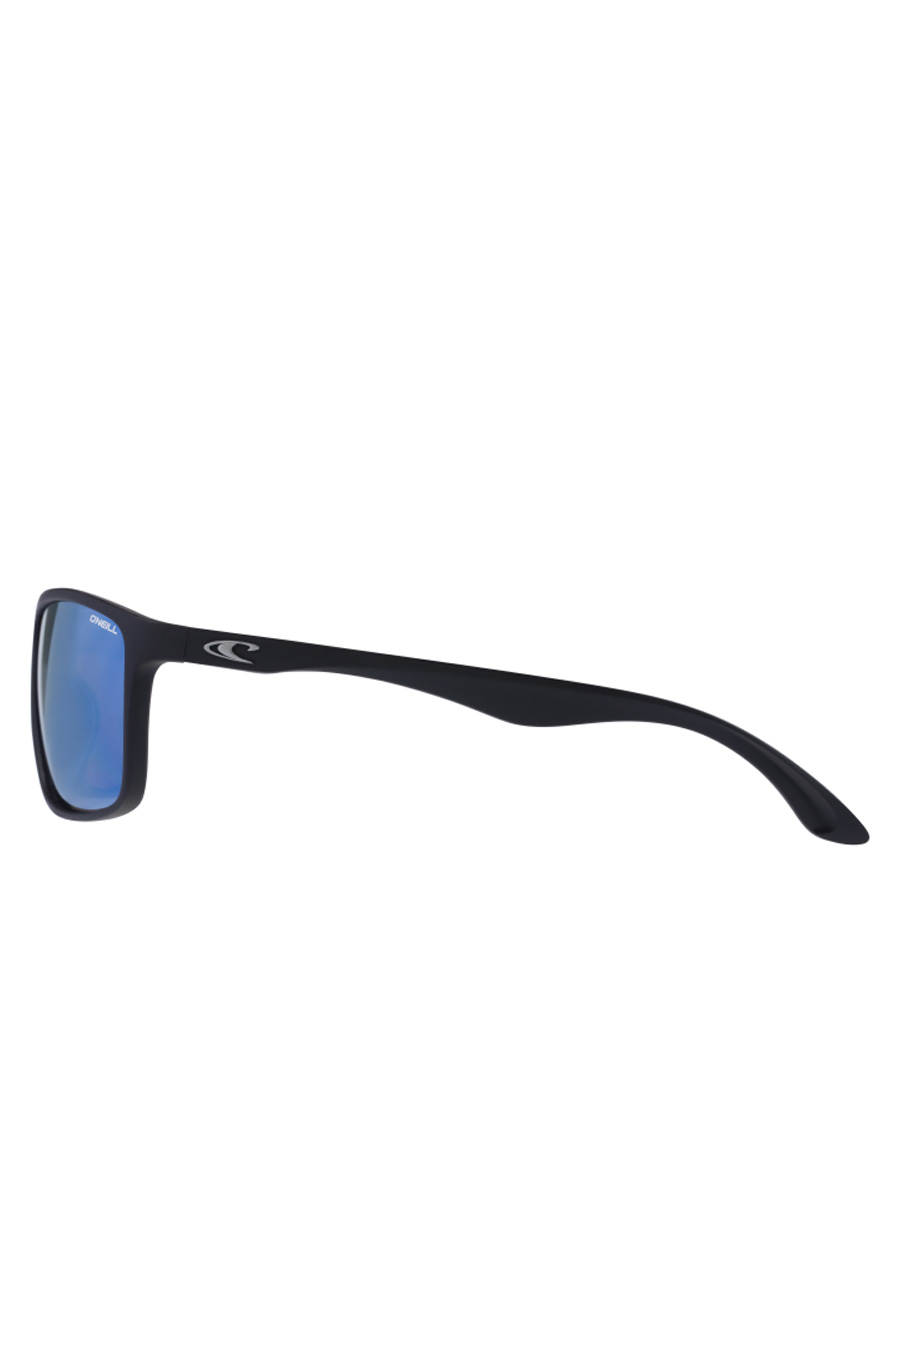 Saulesbrilles ONEILL ONS-9004-20-104P